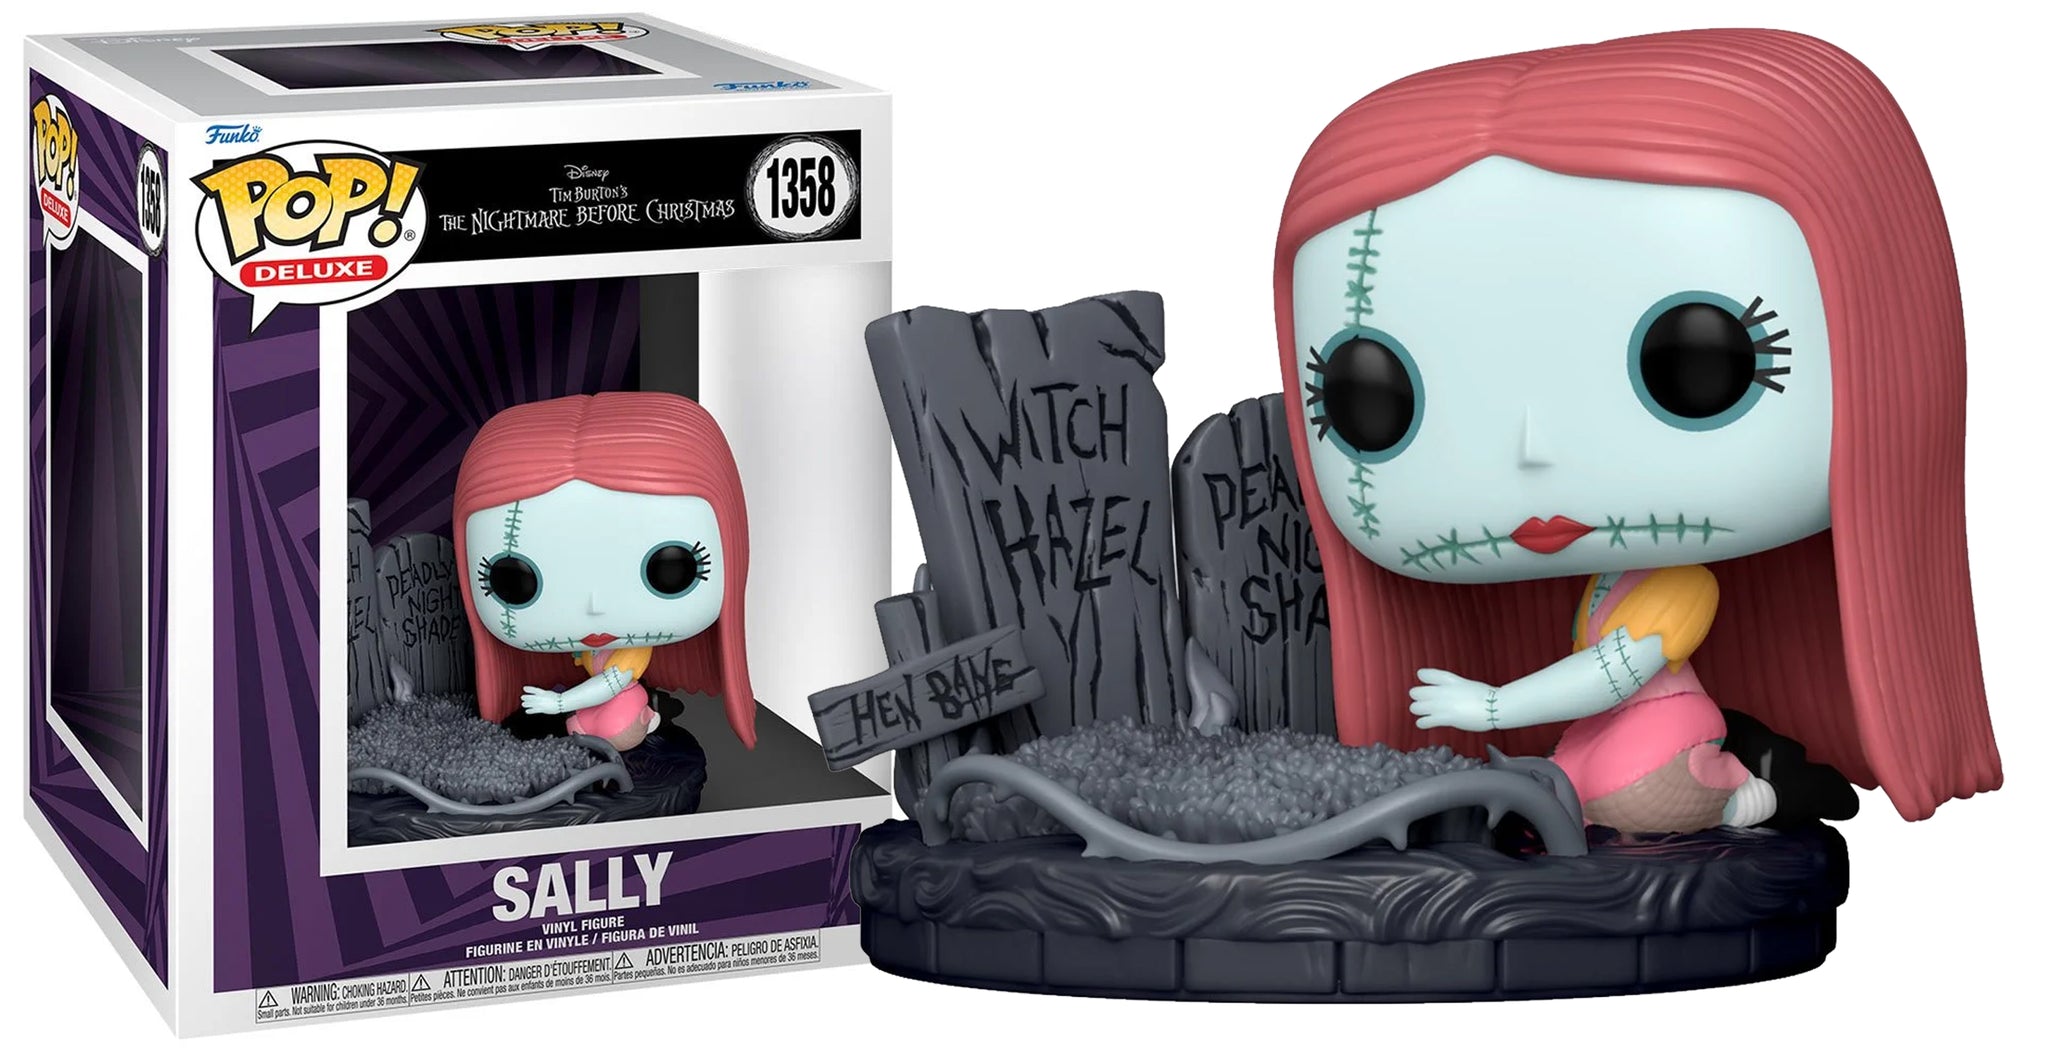 The Nightmare Before Christmas, Gifts & Figurines